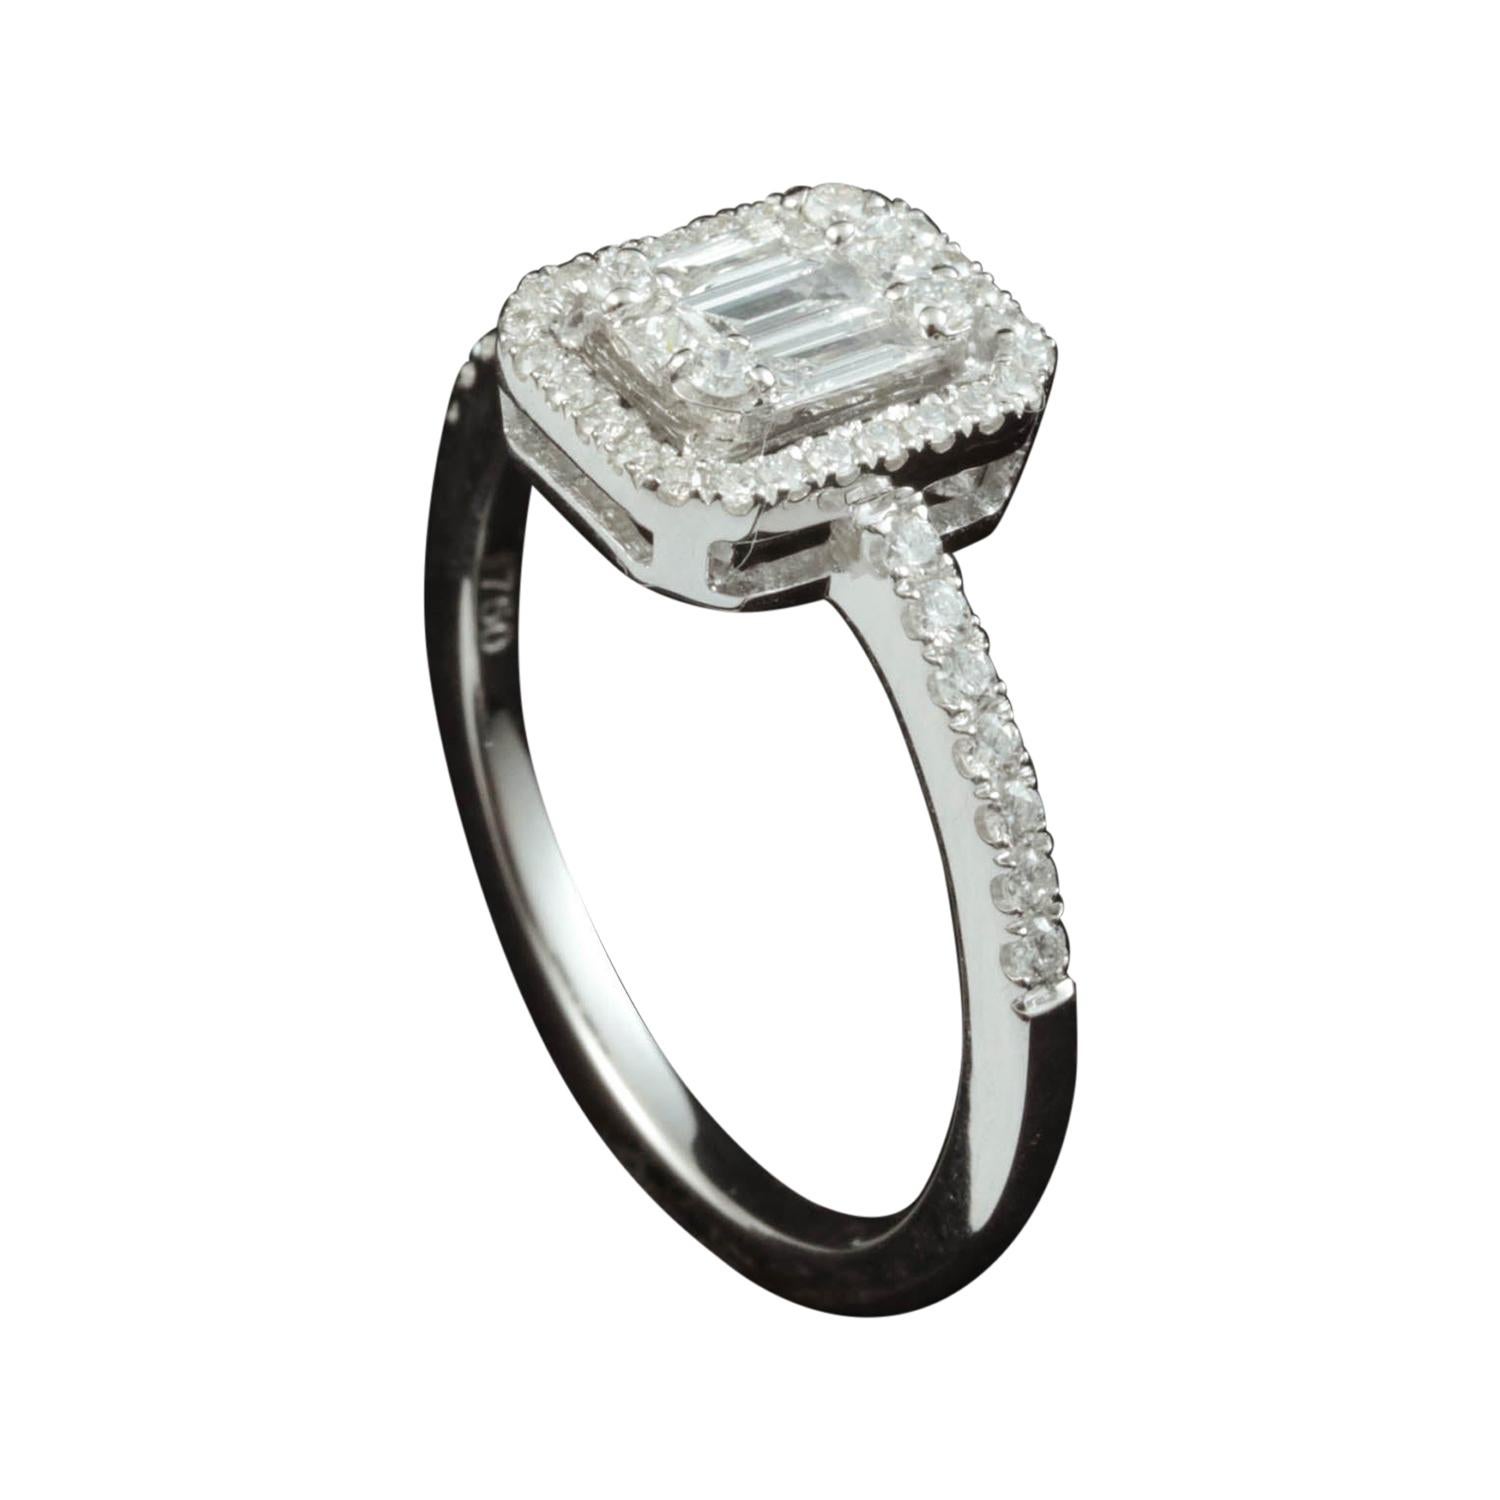 For Sale:  1ct Emerald Cut Diamond Illusion Engagement Ring Set in 18kt Gold